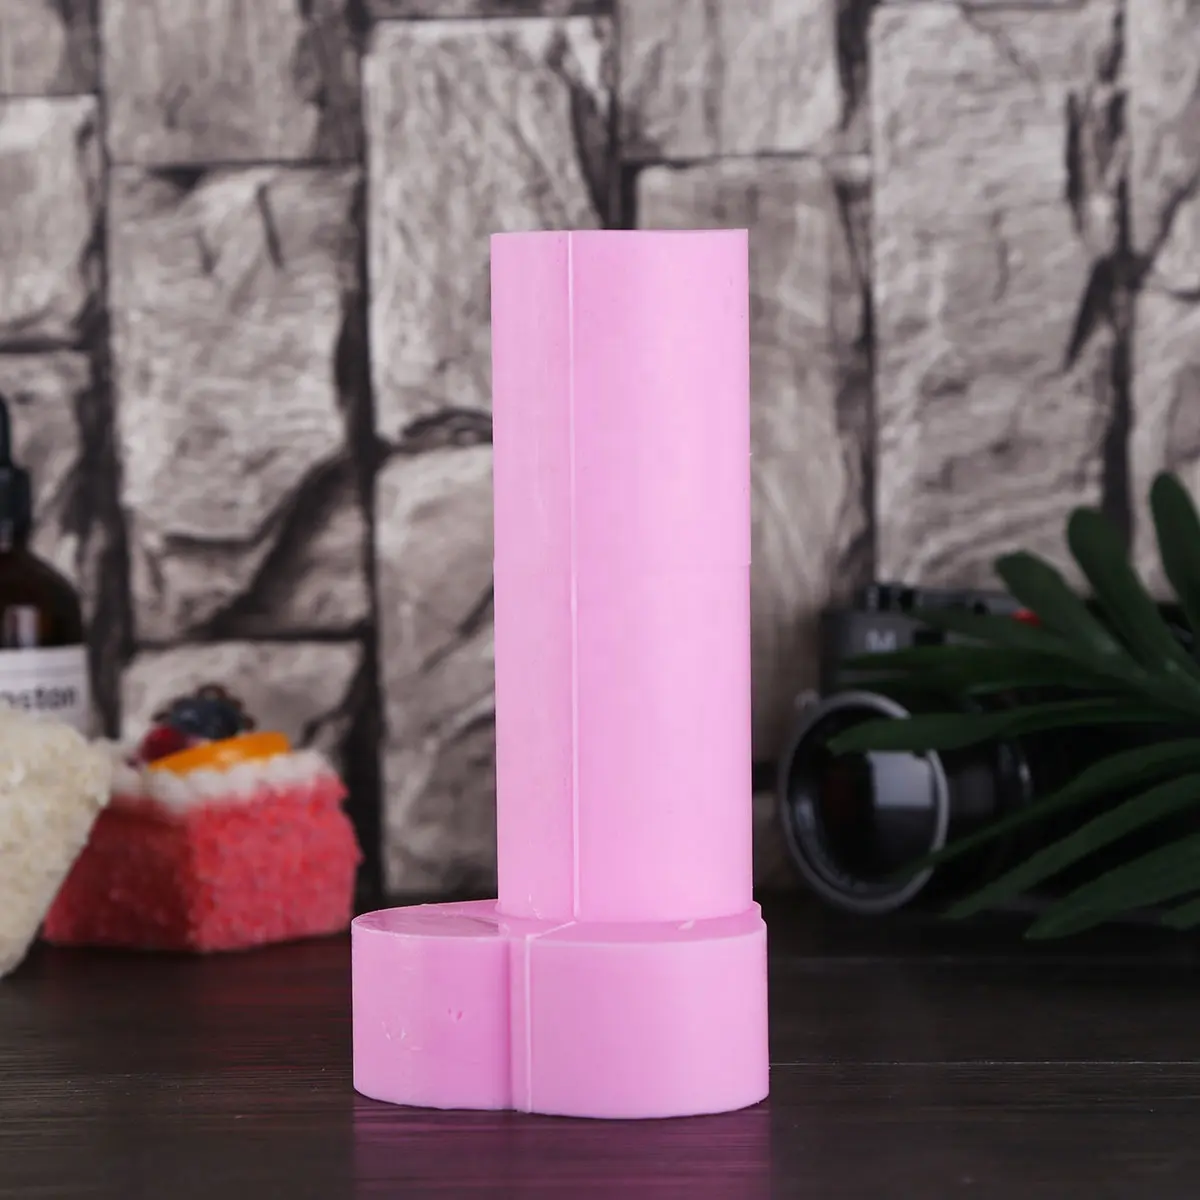 New Sexy Pink Penis Shaped Silicone Mold Temperament And Interest Cake Decoration Fondant Cake 3D Mold Food Grade 3 Sizes